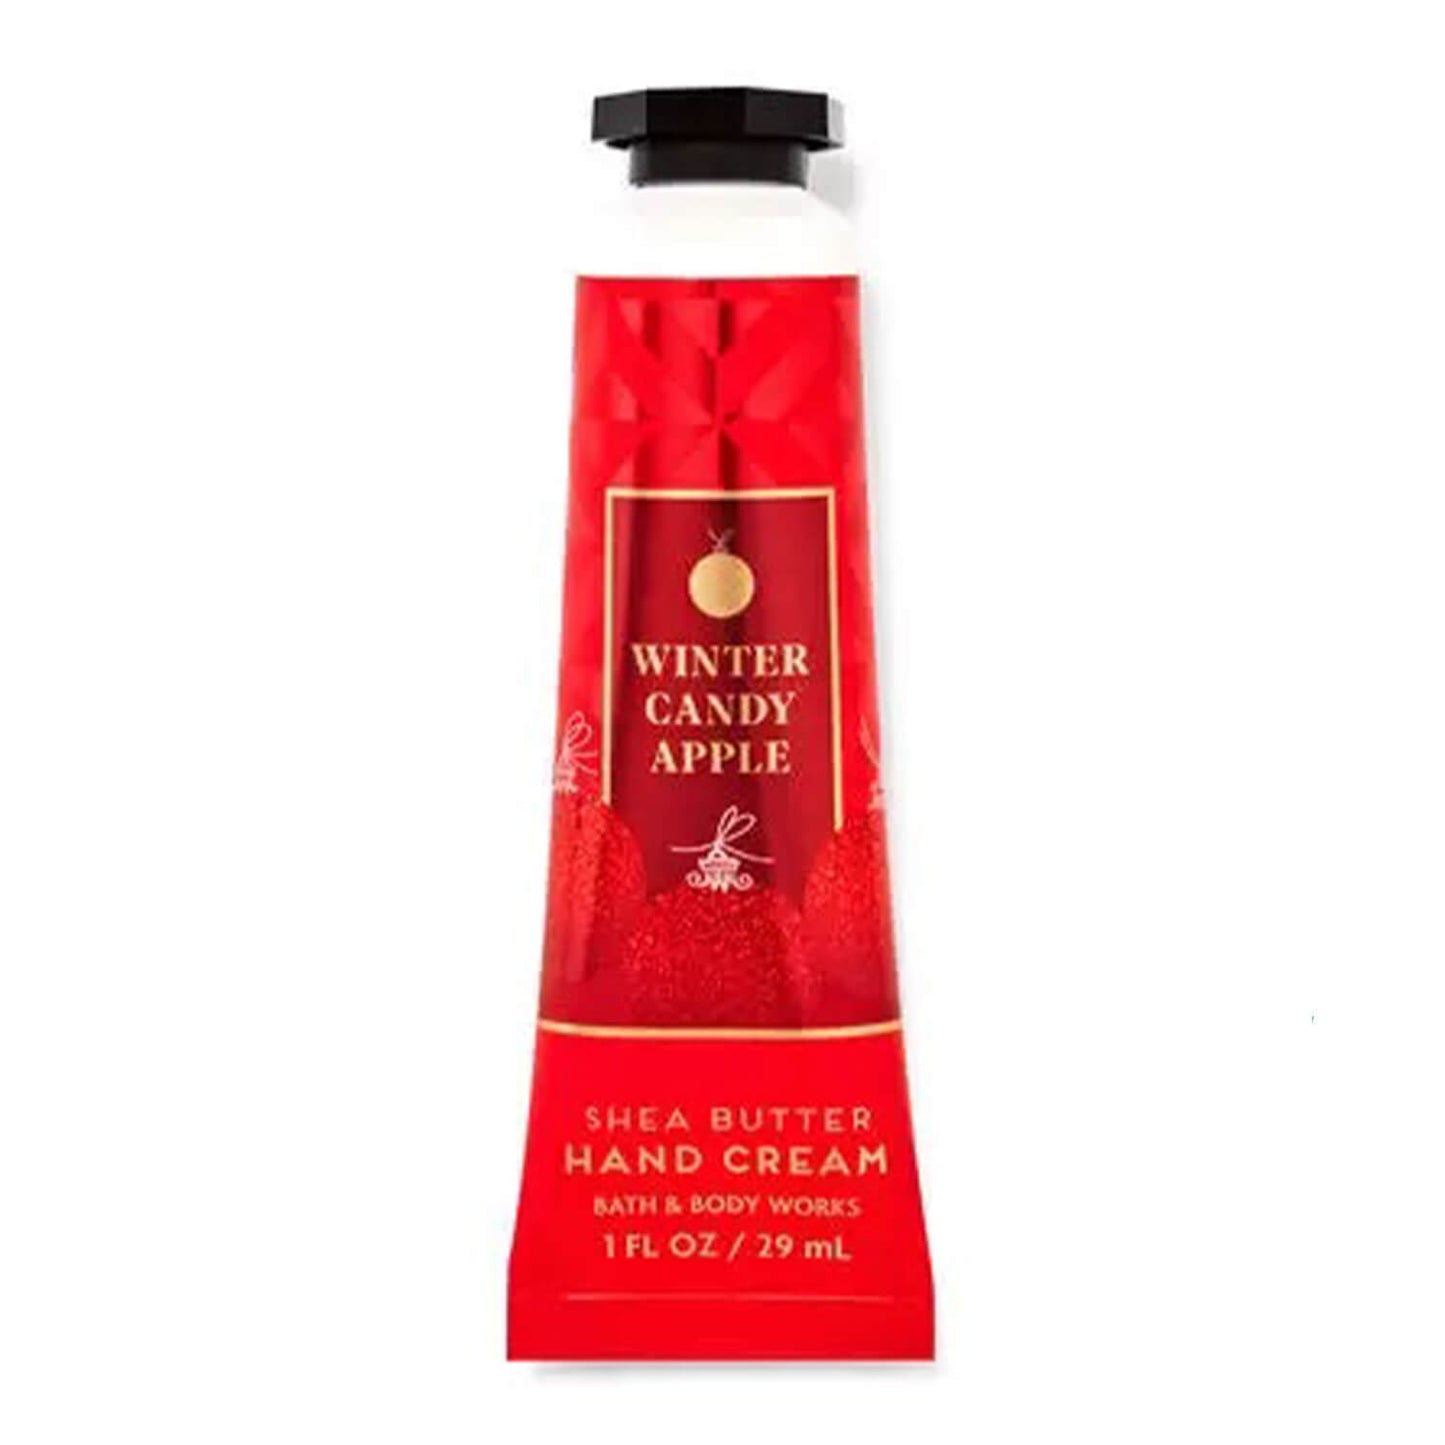 Shop bath and body works hand cream in winter candy apple available at Heygirl.pk for delivery in Pakistan